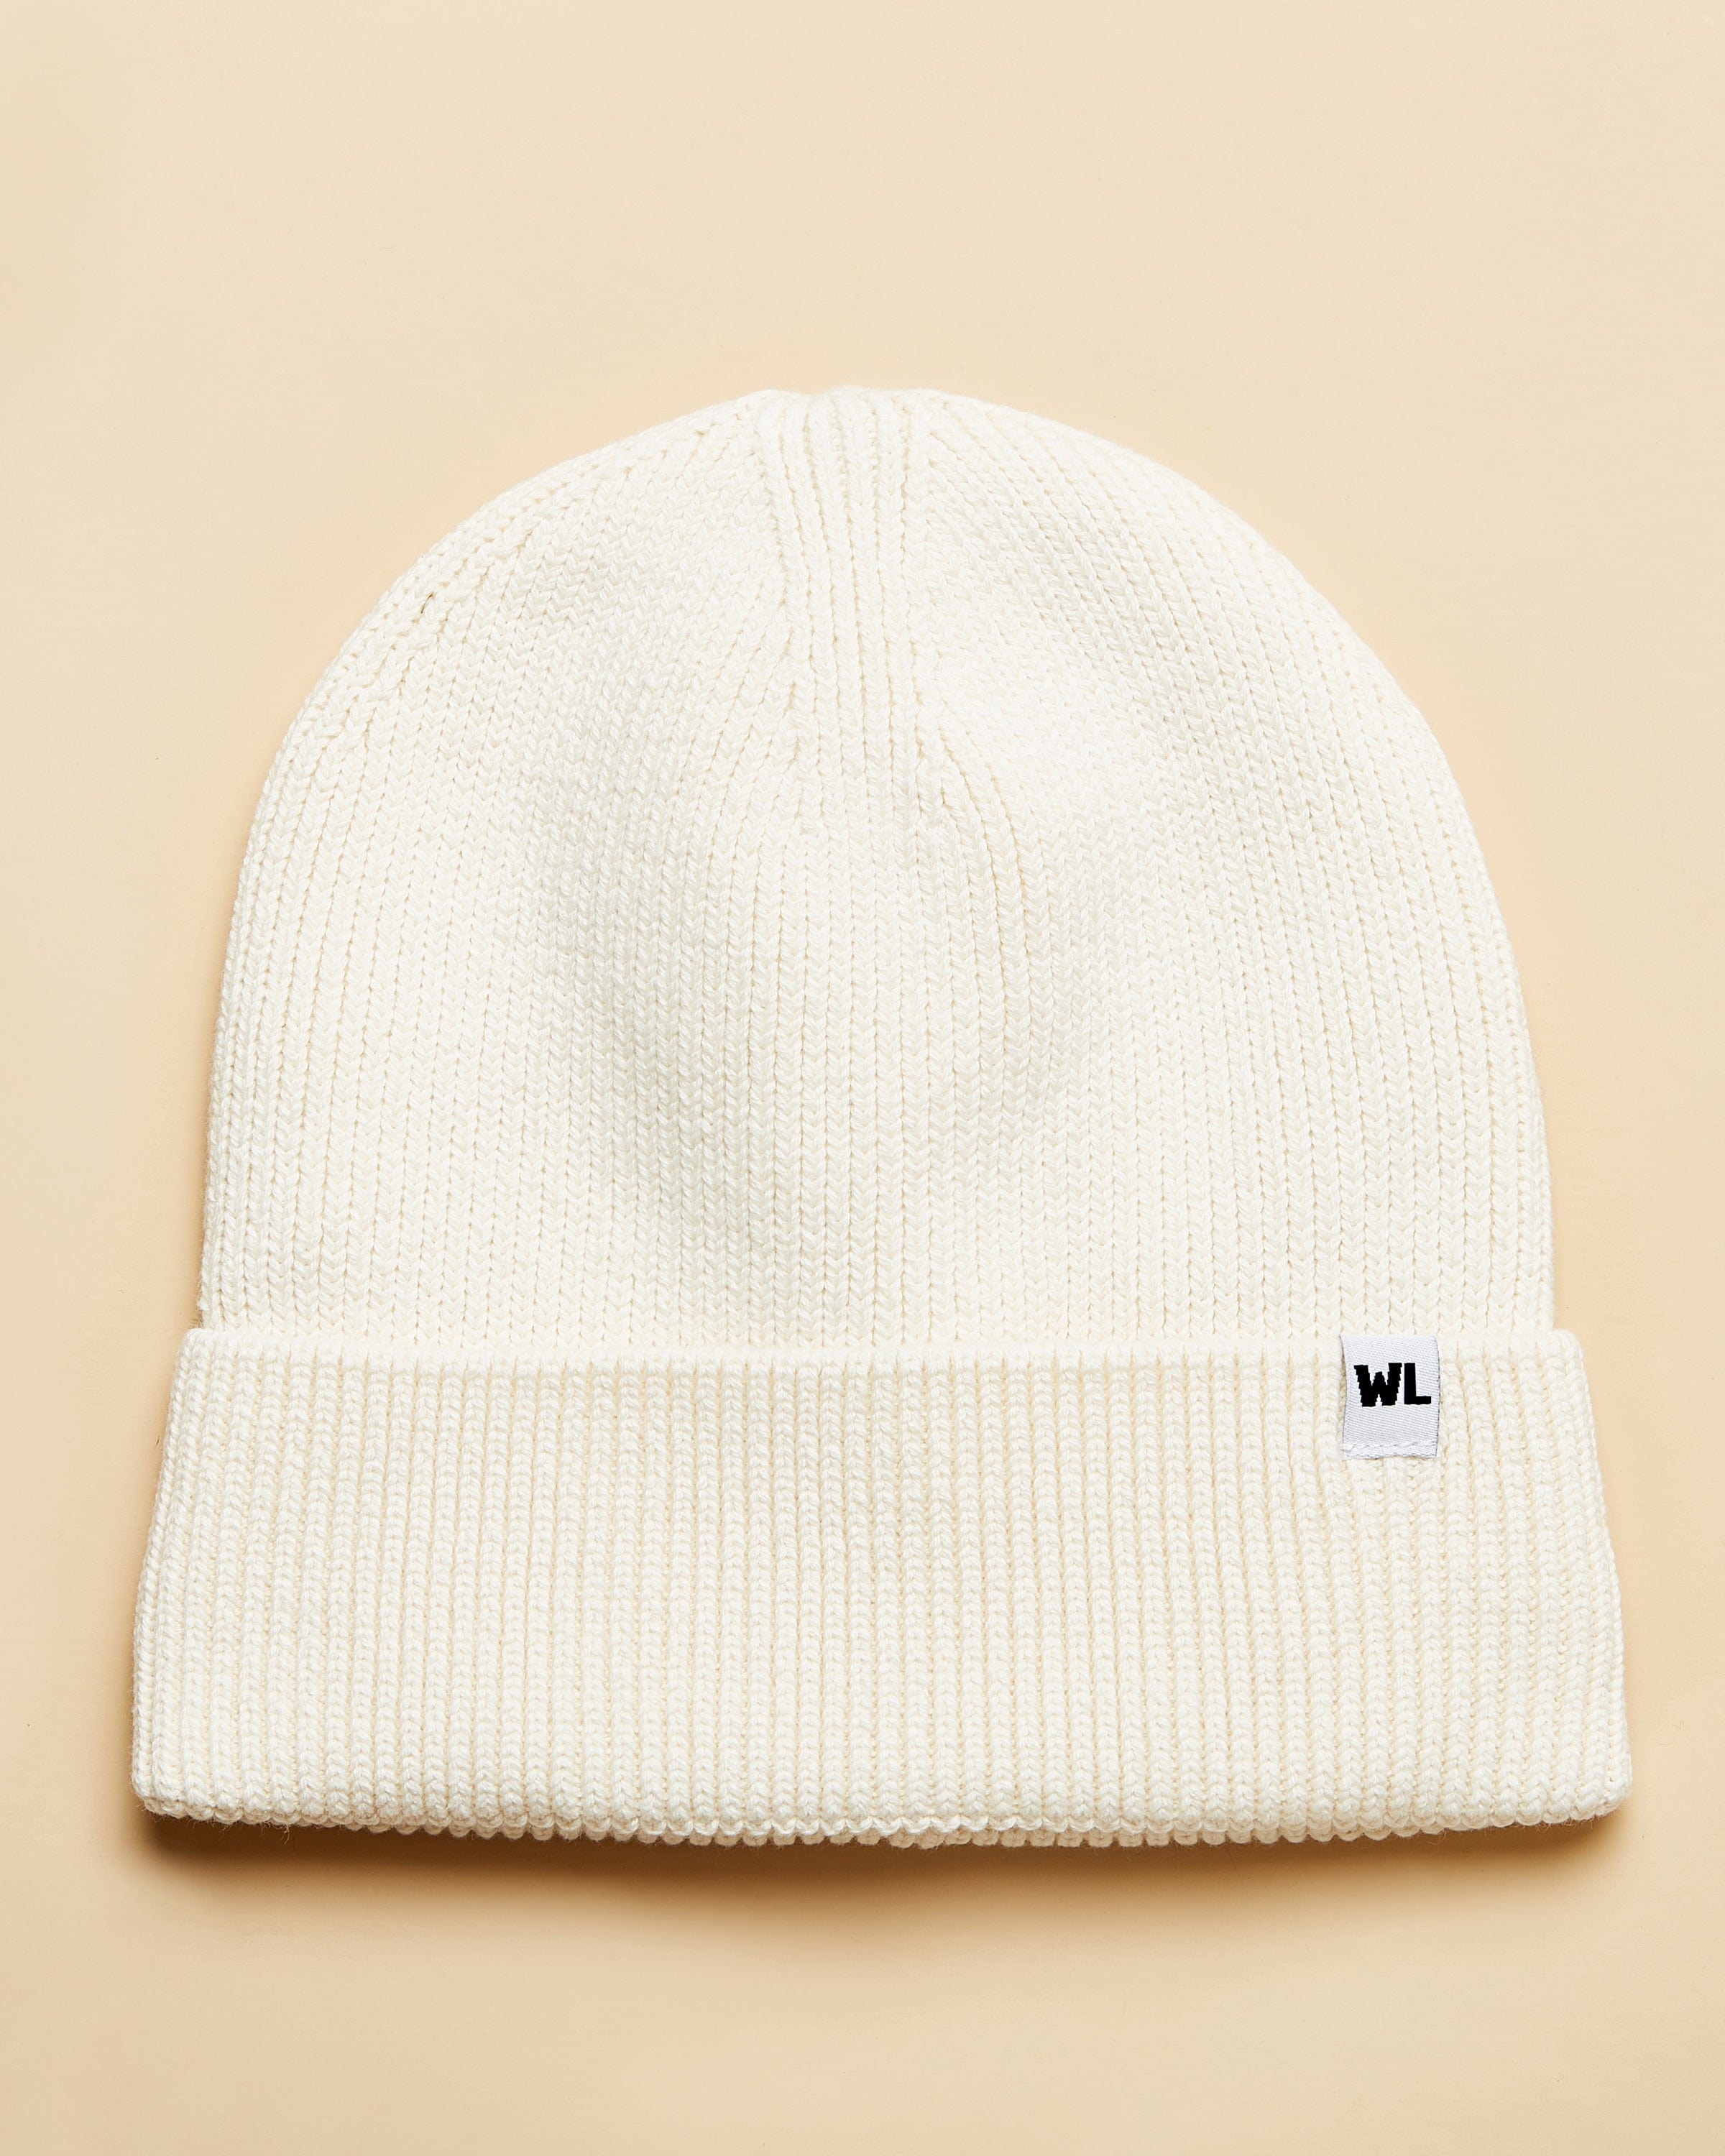 The Wrap Life Cuffed Satin Lined Beanie in Tusk White Hat